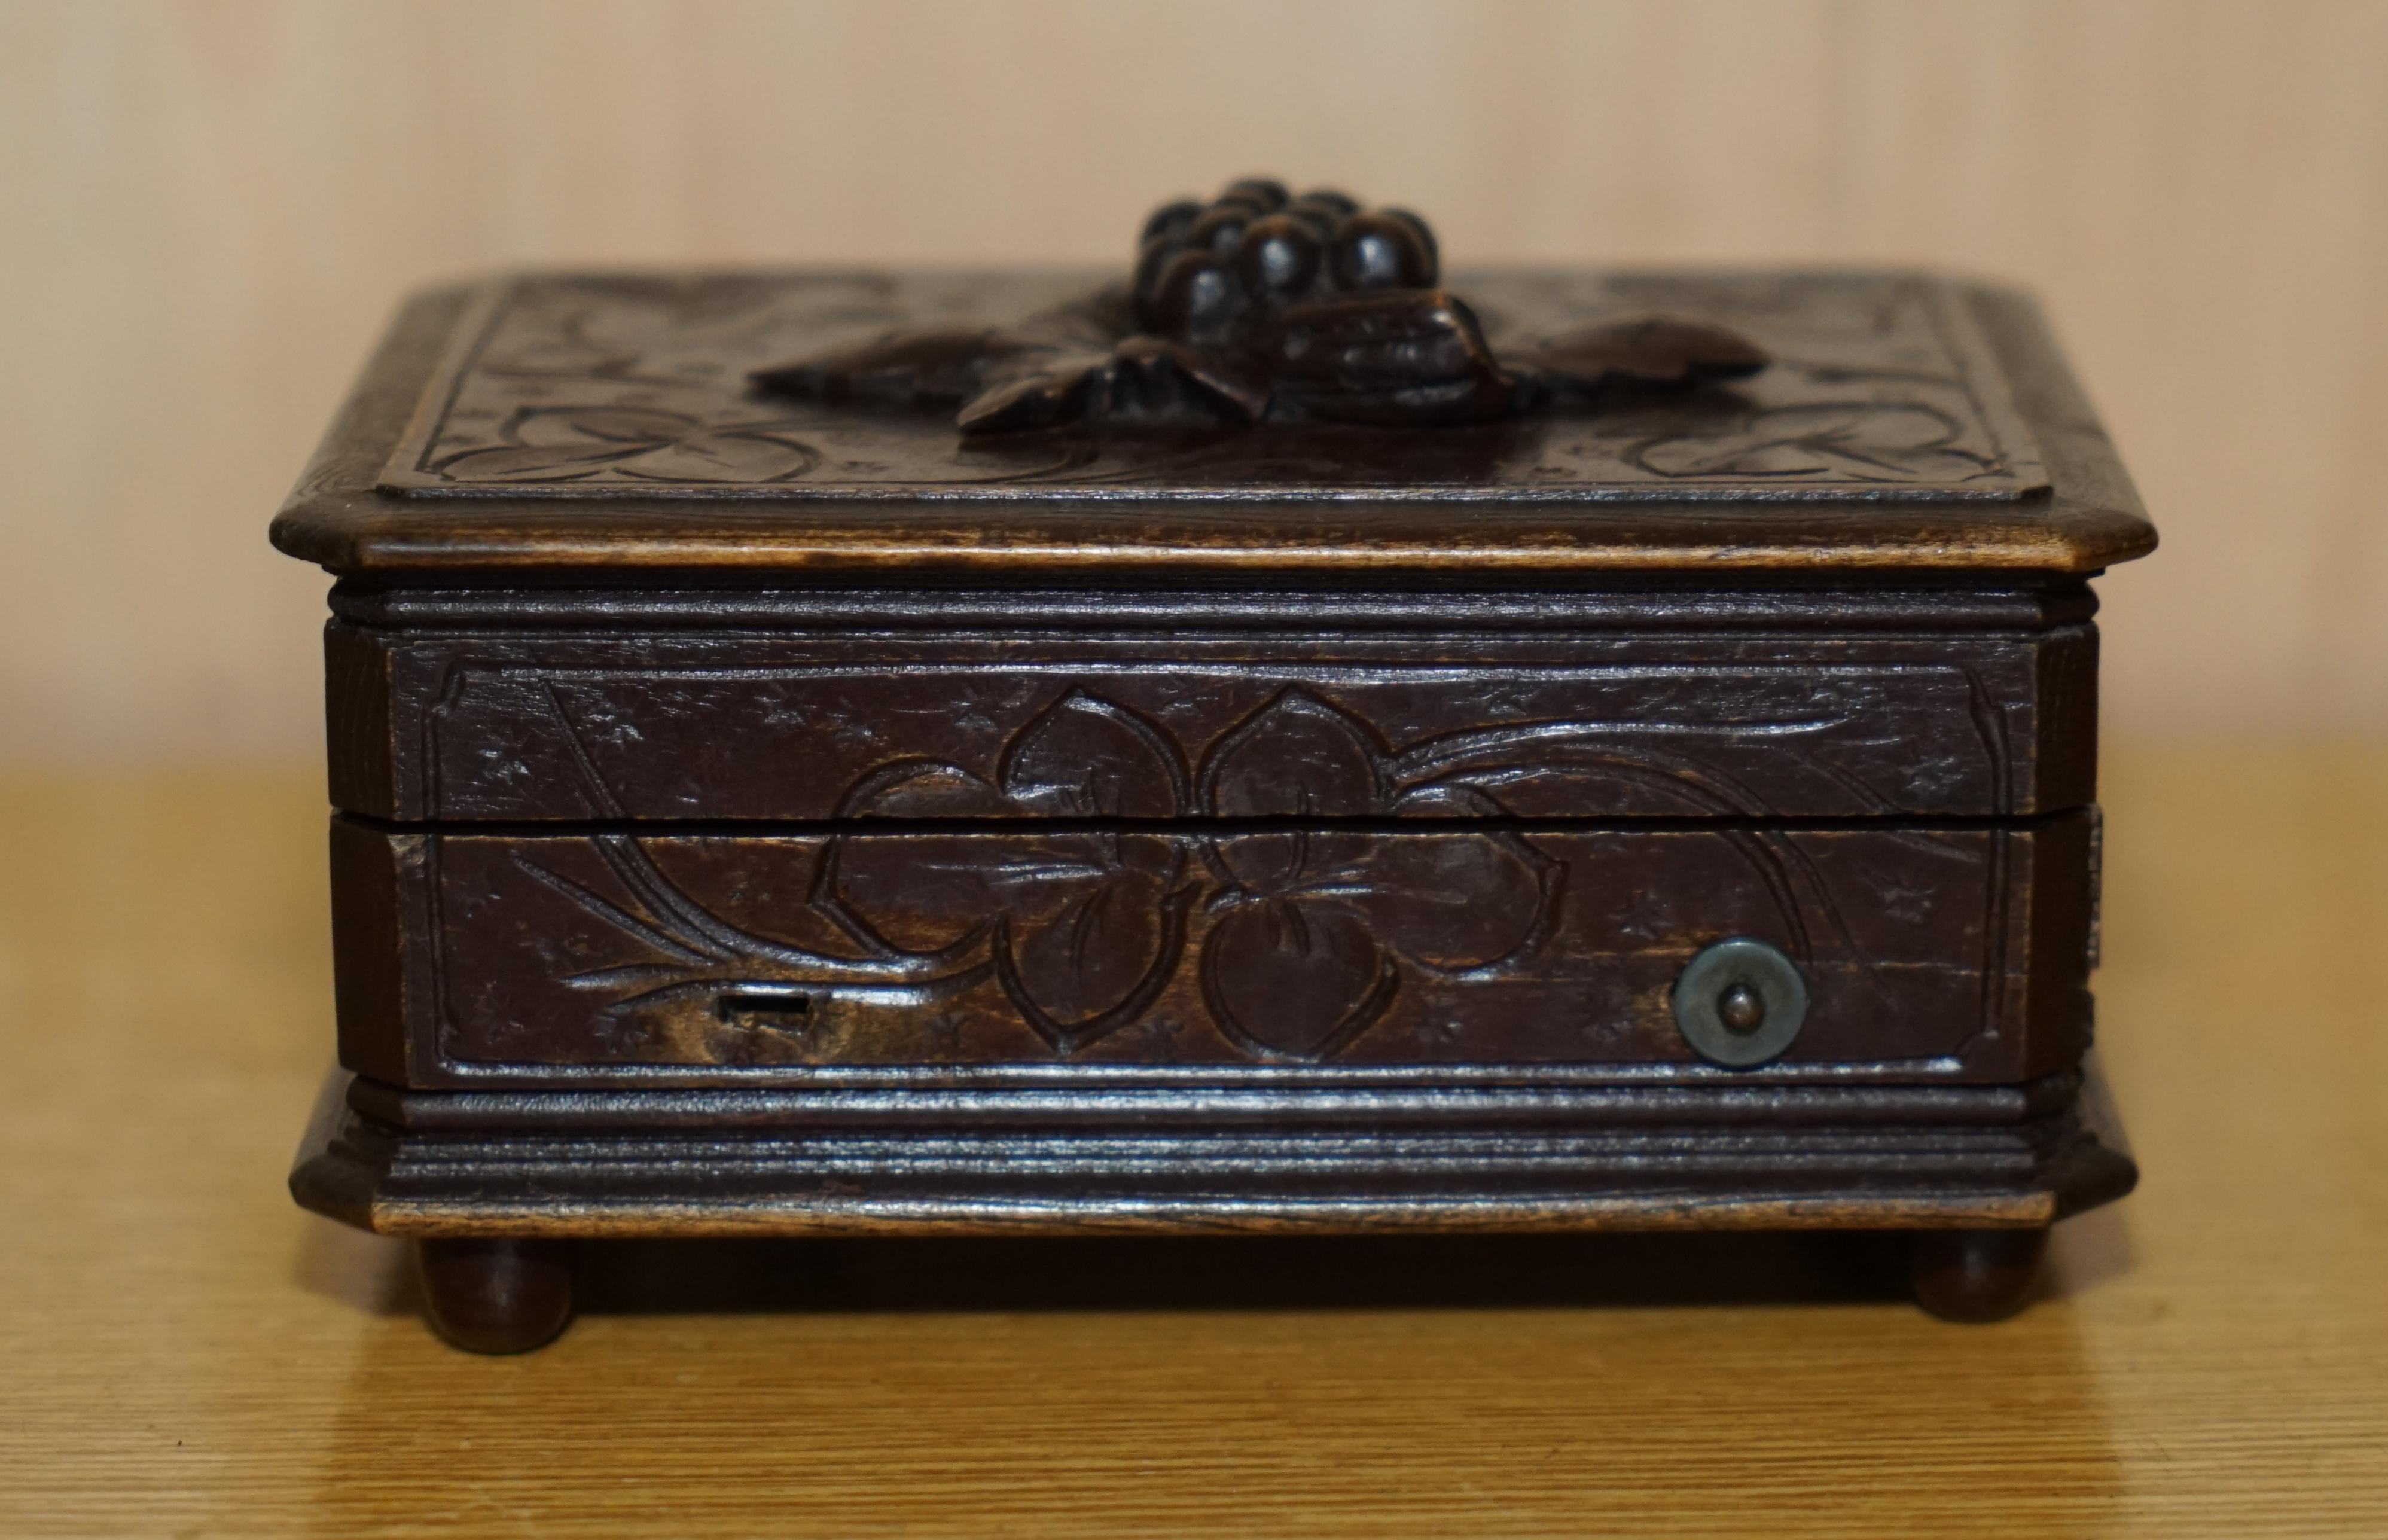 We are delighted to offer for sale this antique original circa 1880 Black Forest Wood music box with grape vine carving to the top

A very good looking and well made piece, it is hand carved all over with floral decorations to the top

The